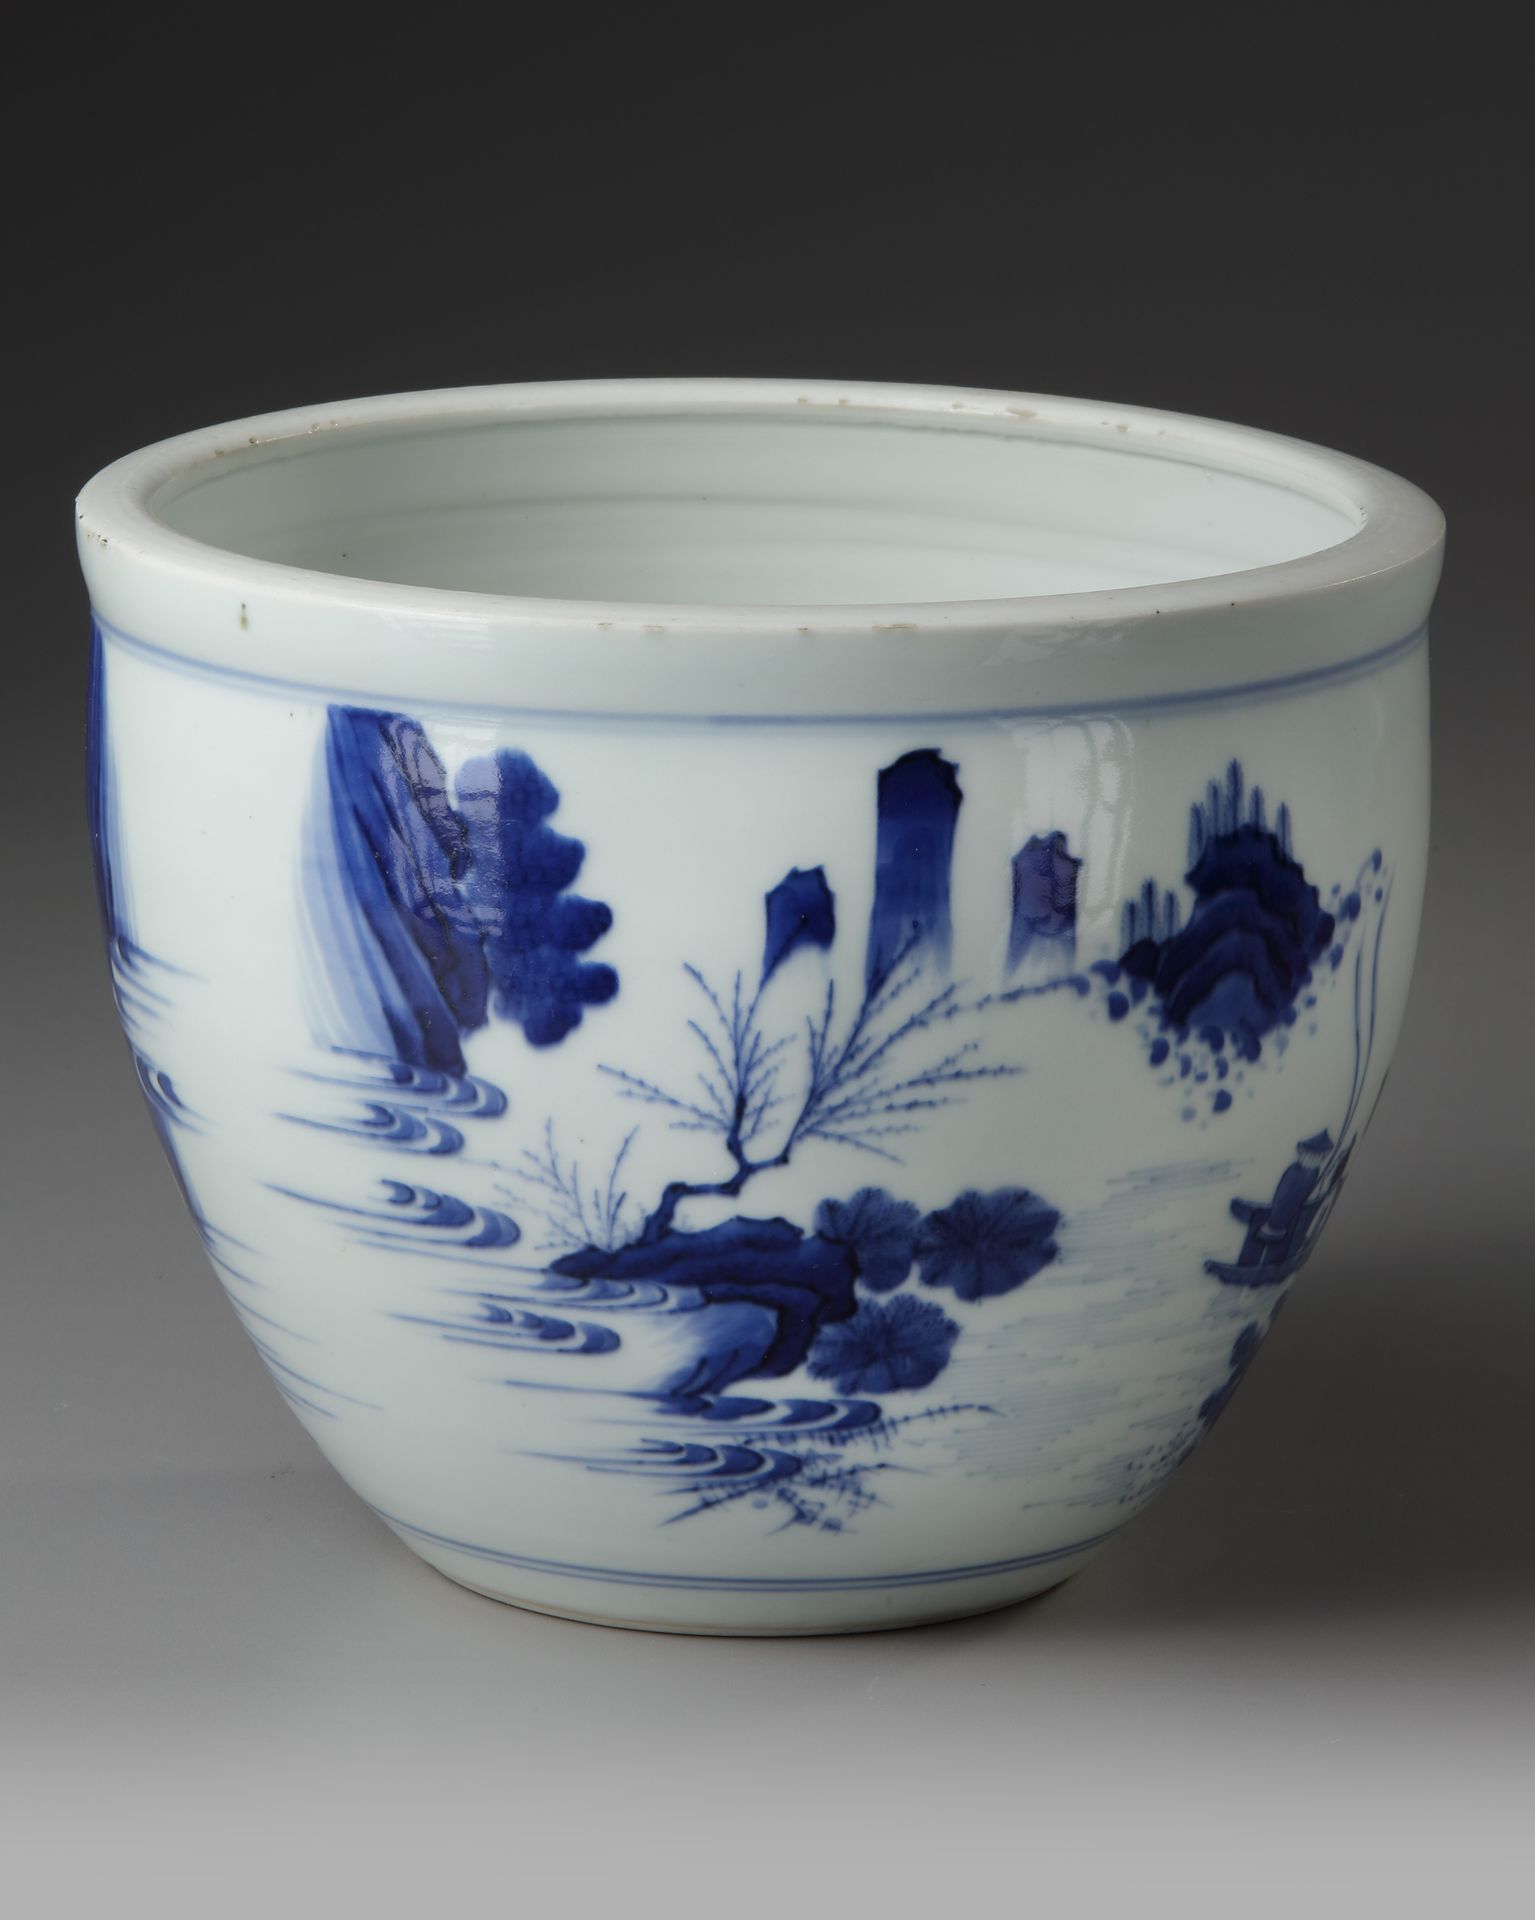 A CHINESE BLUE AND WHITE SCROLL POT, QING DYNASTY (1644–1911) - Image 2 of 4